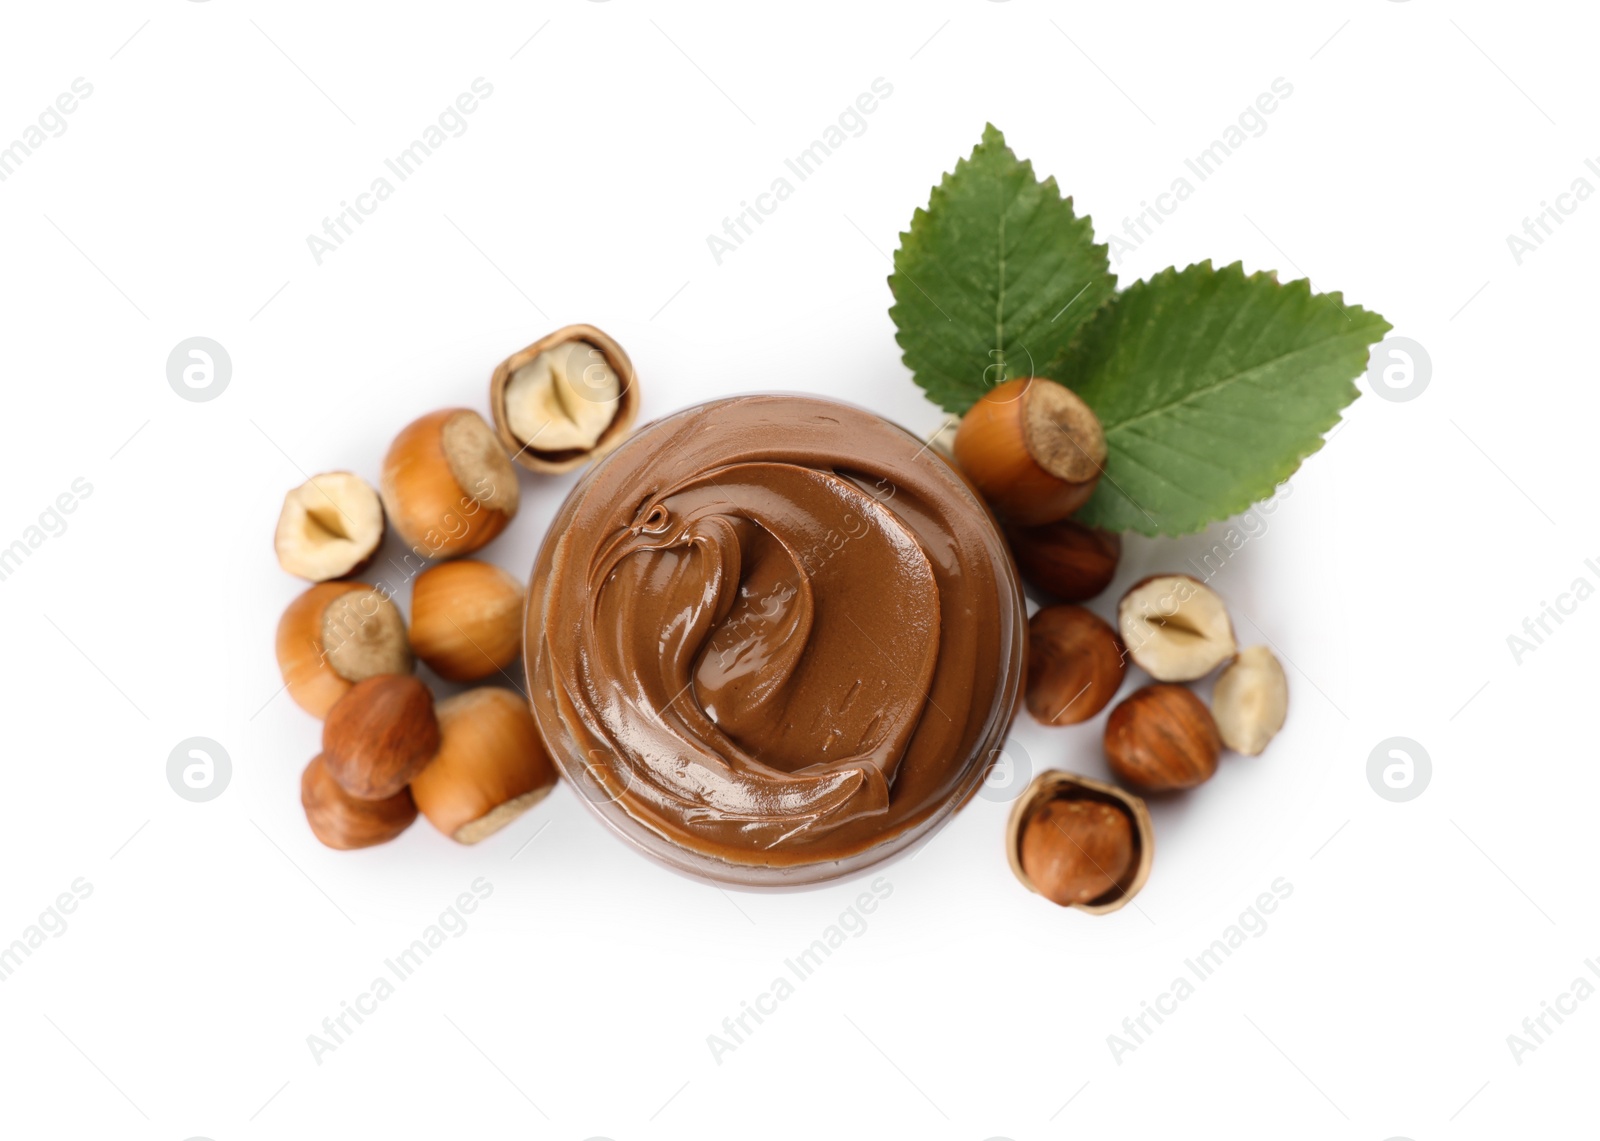 Photo of Tasty chocolate hazelnut spread and nuts on white background, top view